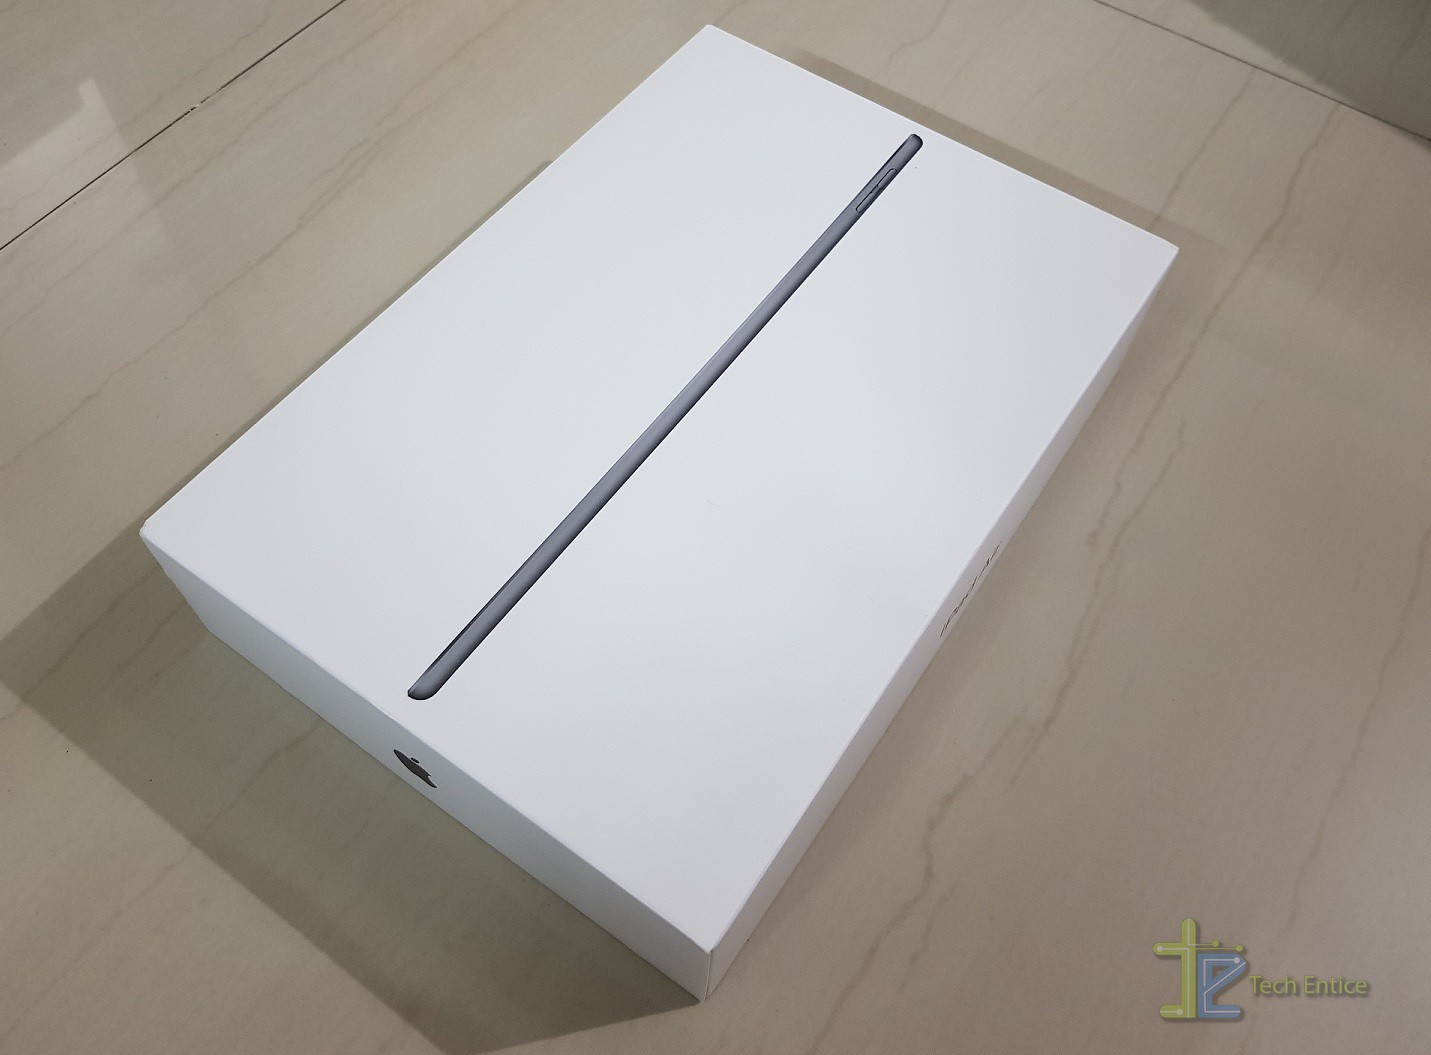 Apple iPad Air 2019 3rd Generation Review